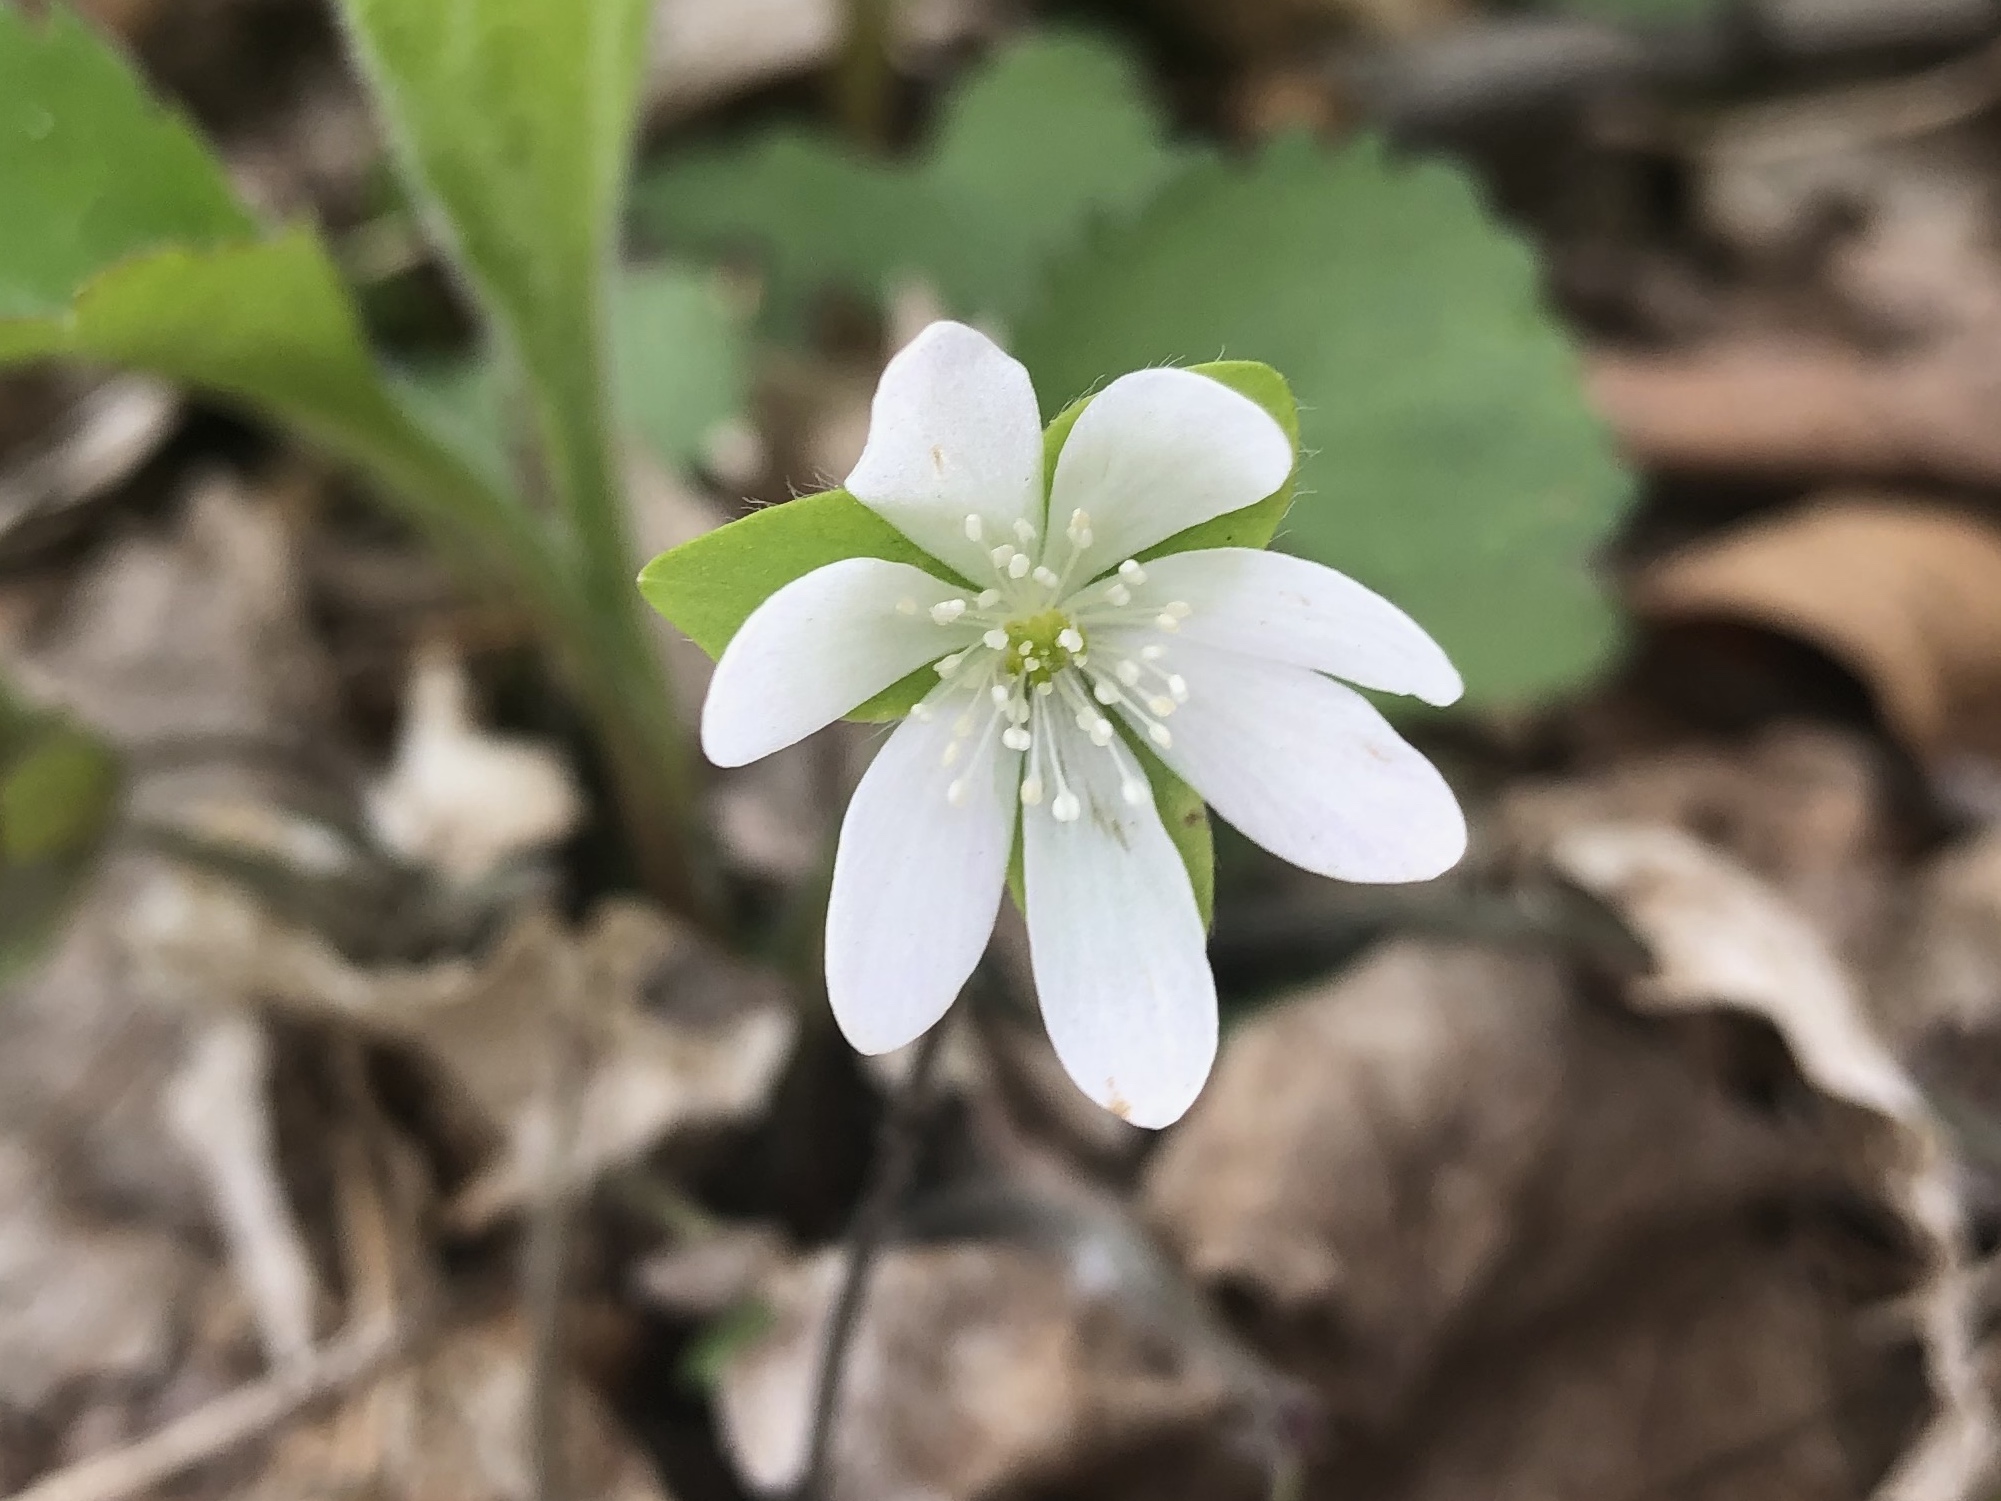 Sharp-lobed Hepatica in the Maple-Basswood Forest of the University of Wisconsin Arboretum in Madison, Wisconsin on May 4, 2020.